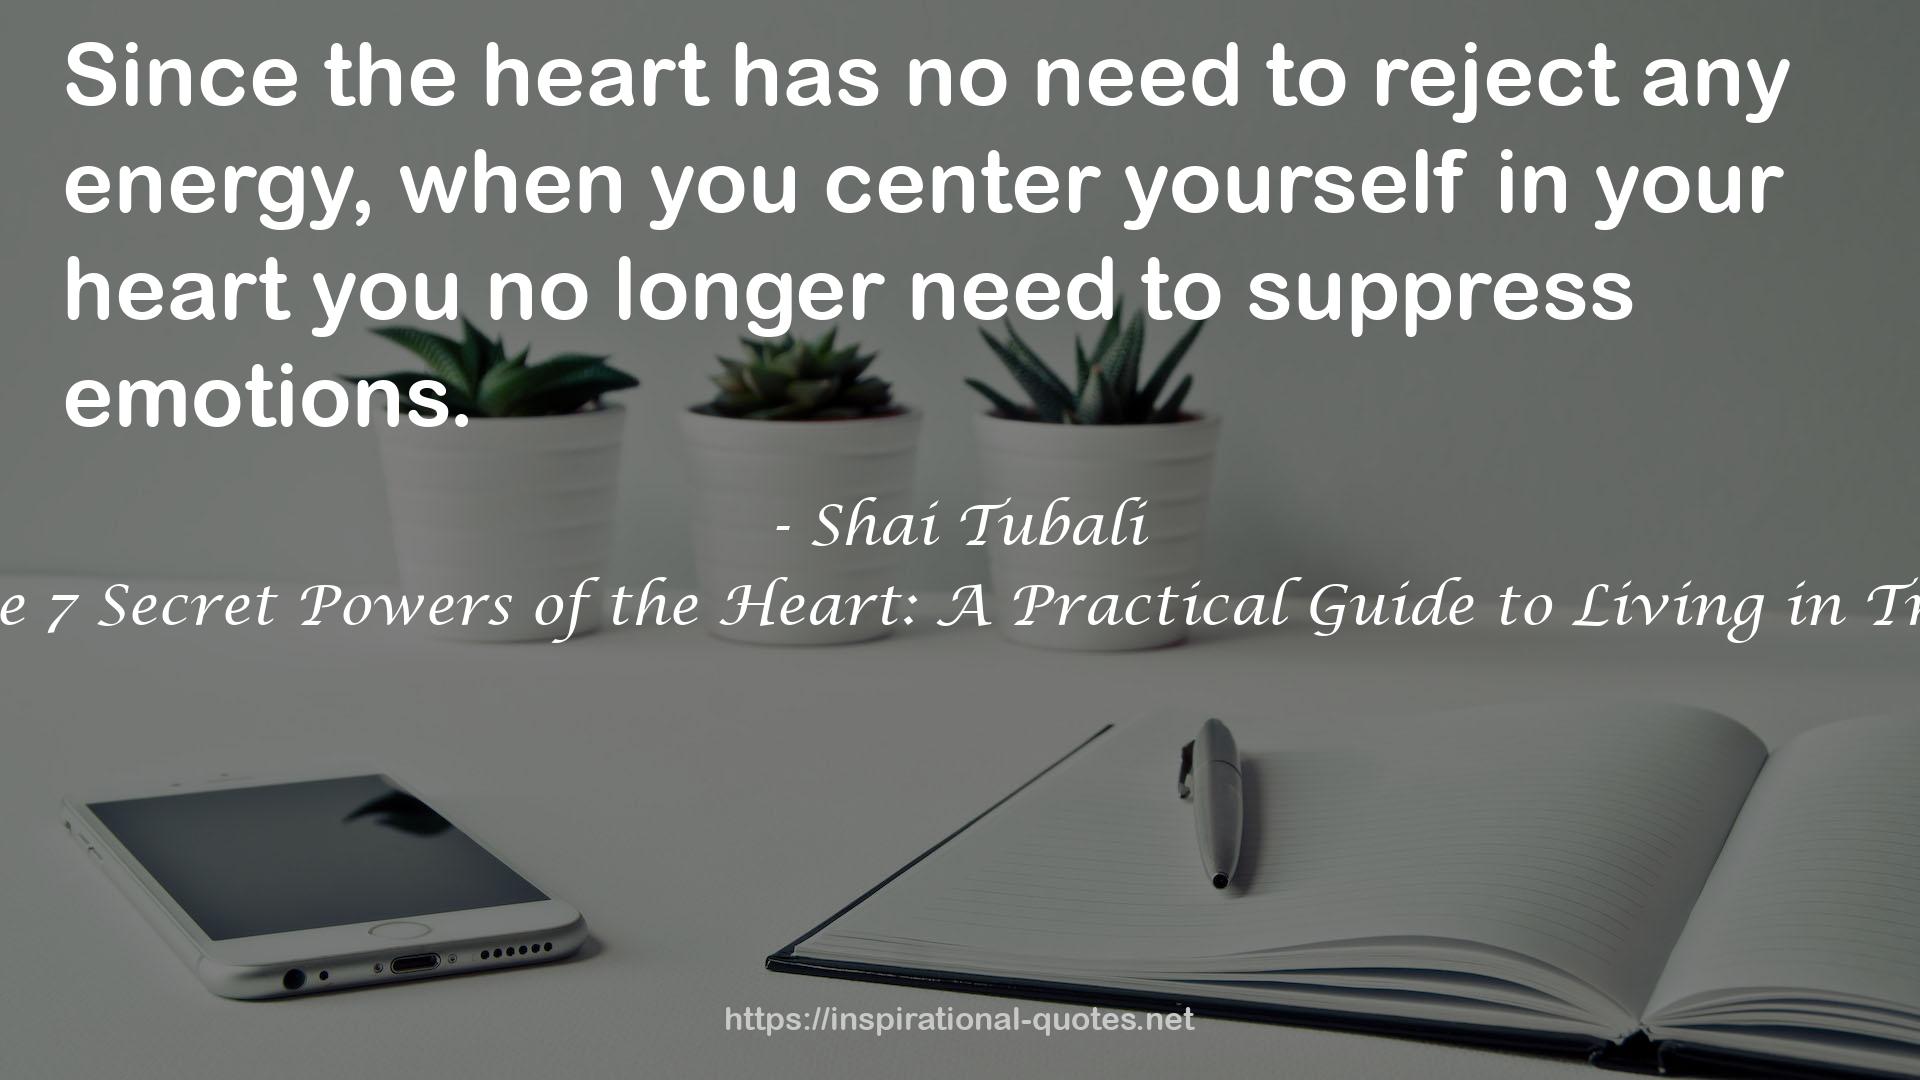 Unlocking the 7 Secret Powers of the Heart: A Practical Guide to Living in Trust and Love QUOTES